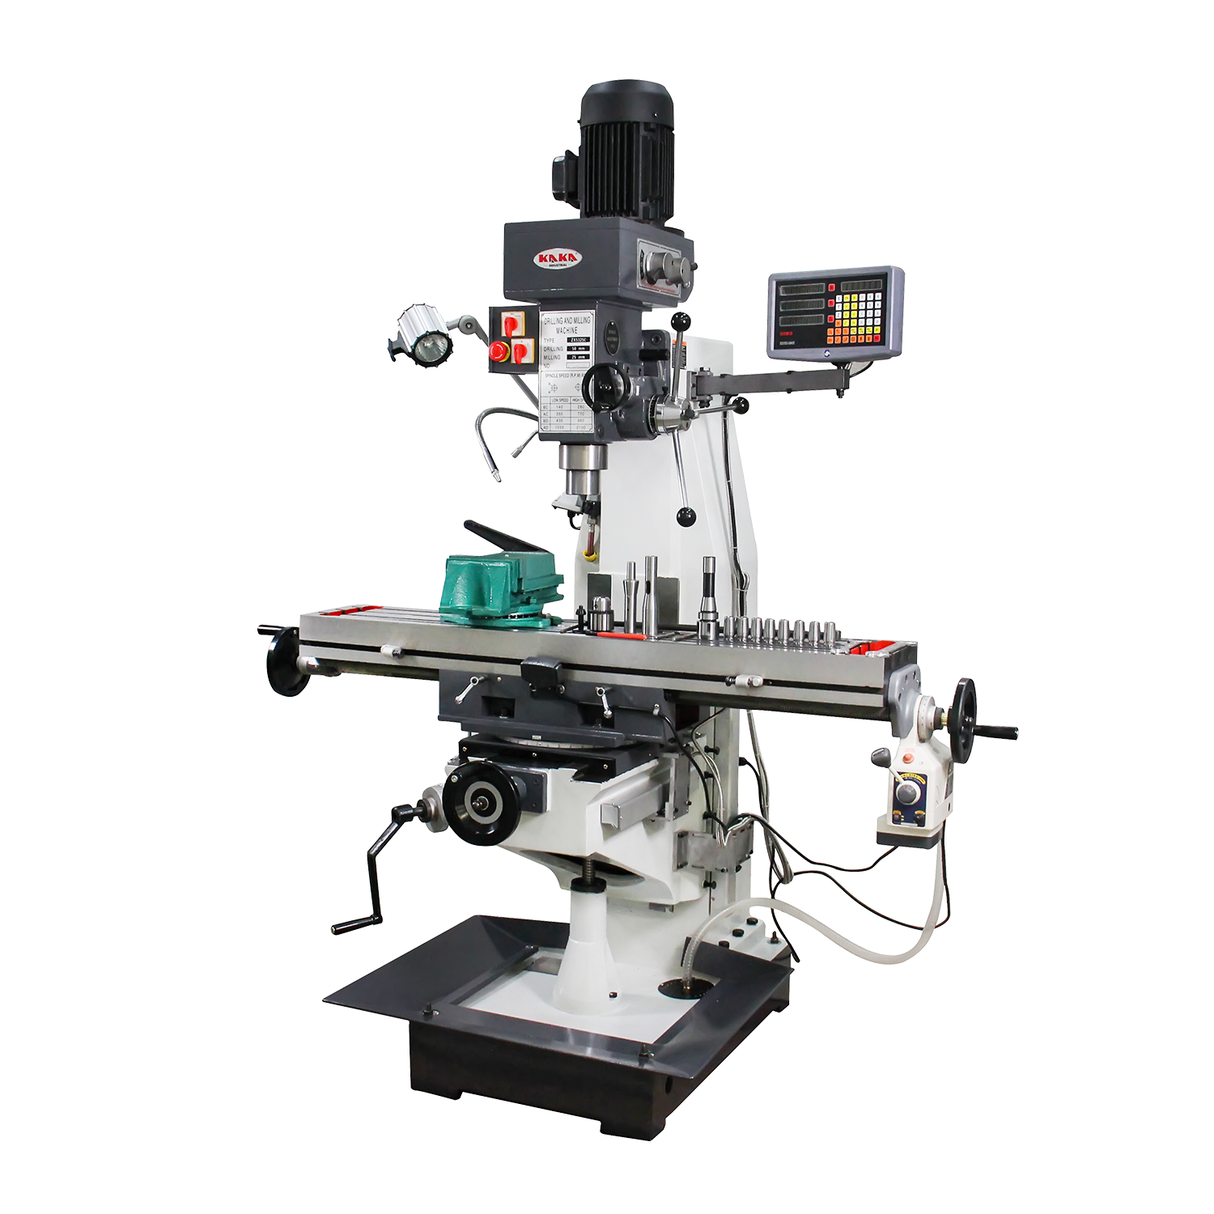 KANG Industrial ZX5325C Drilling and milling machine, Gear Head Auto Feed Table Drilling and milling machine with 3 Axis DRO, 415V Motor